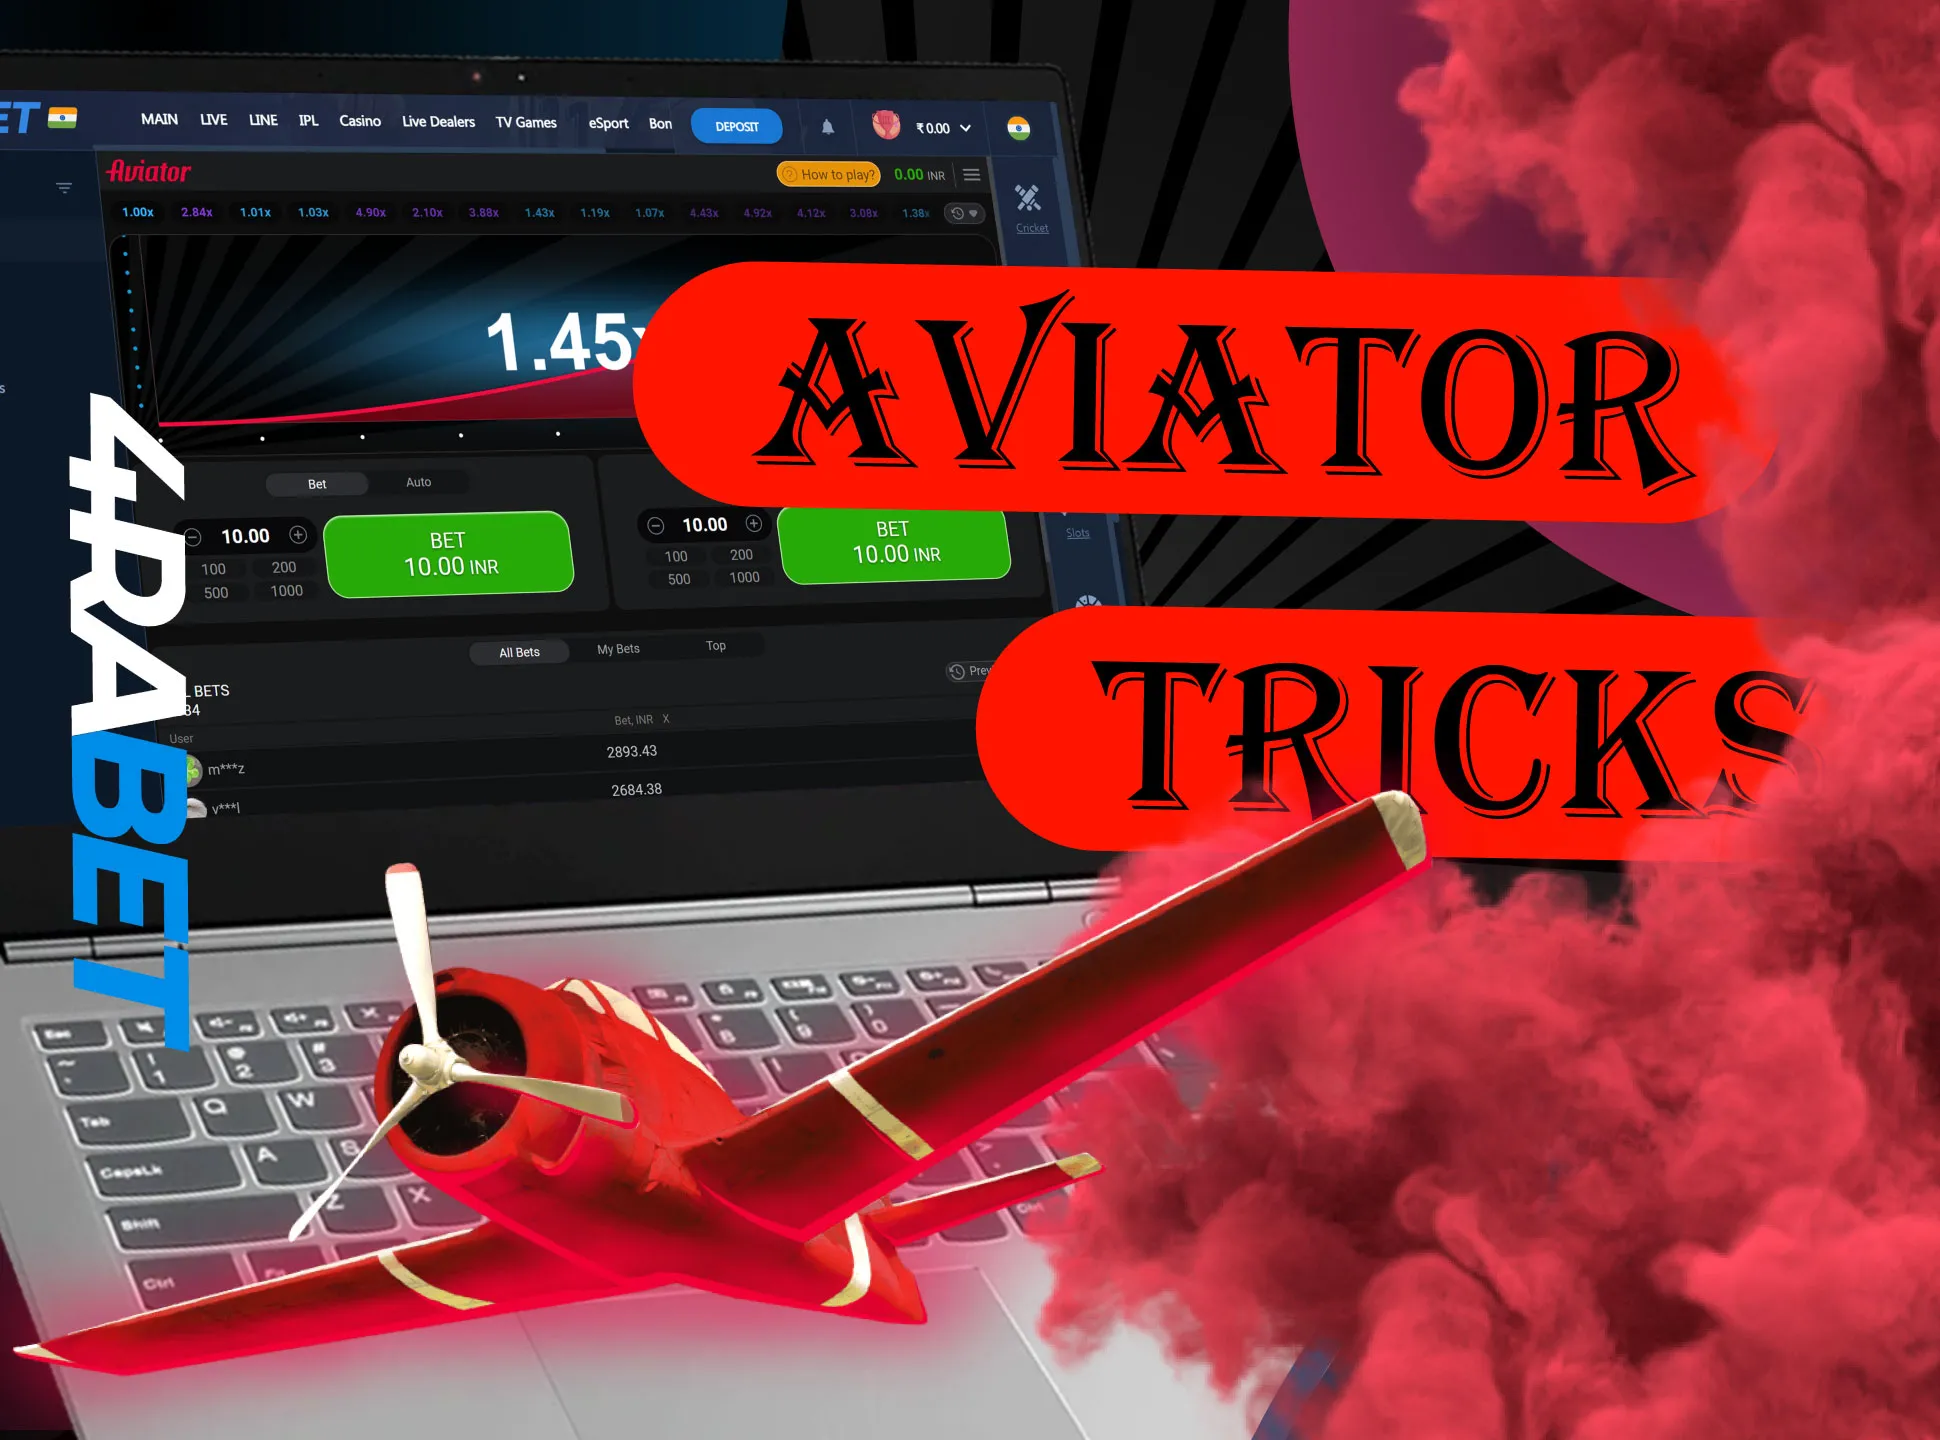 These are some tricks to play Aviator with profit.